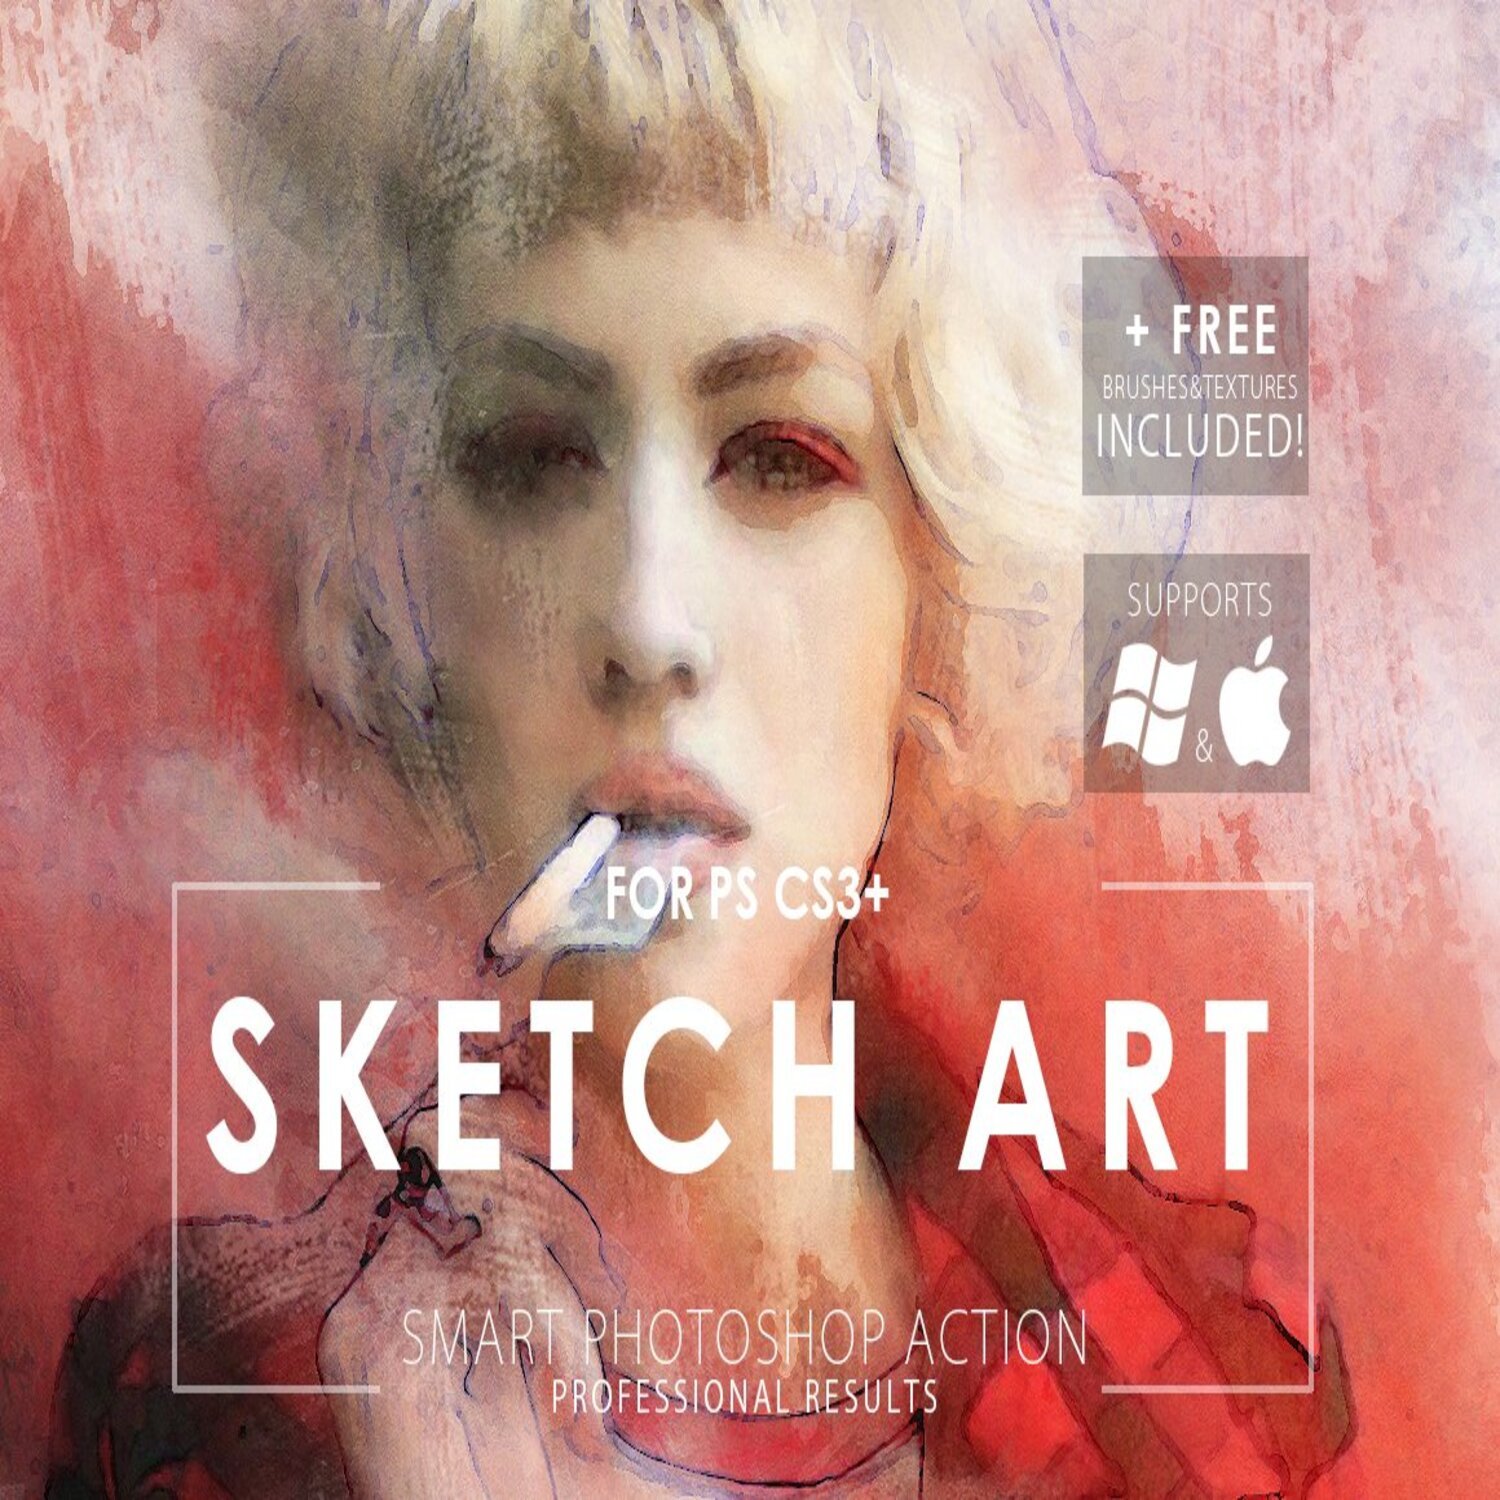 Sketch Art Photoshop Action main cover.